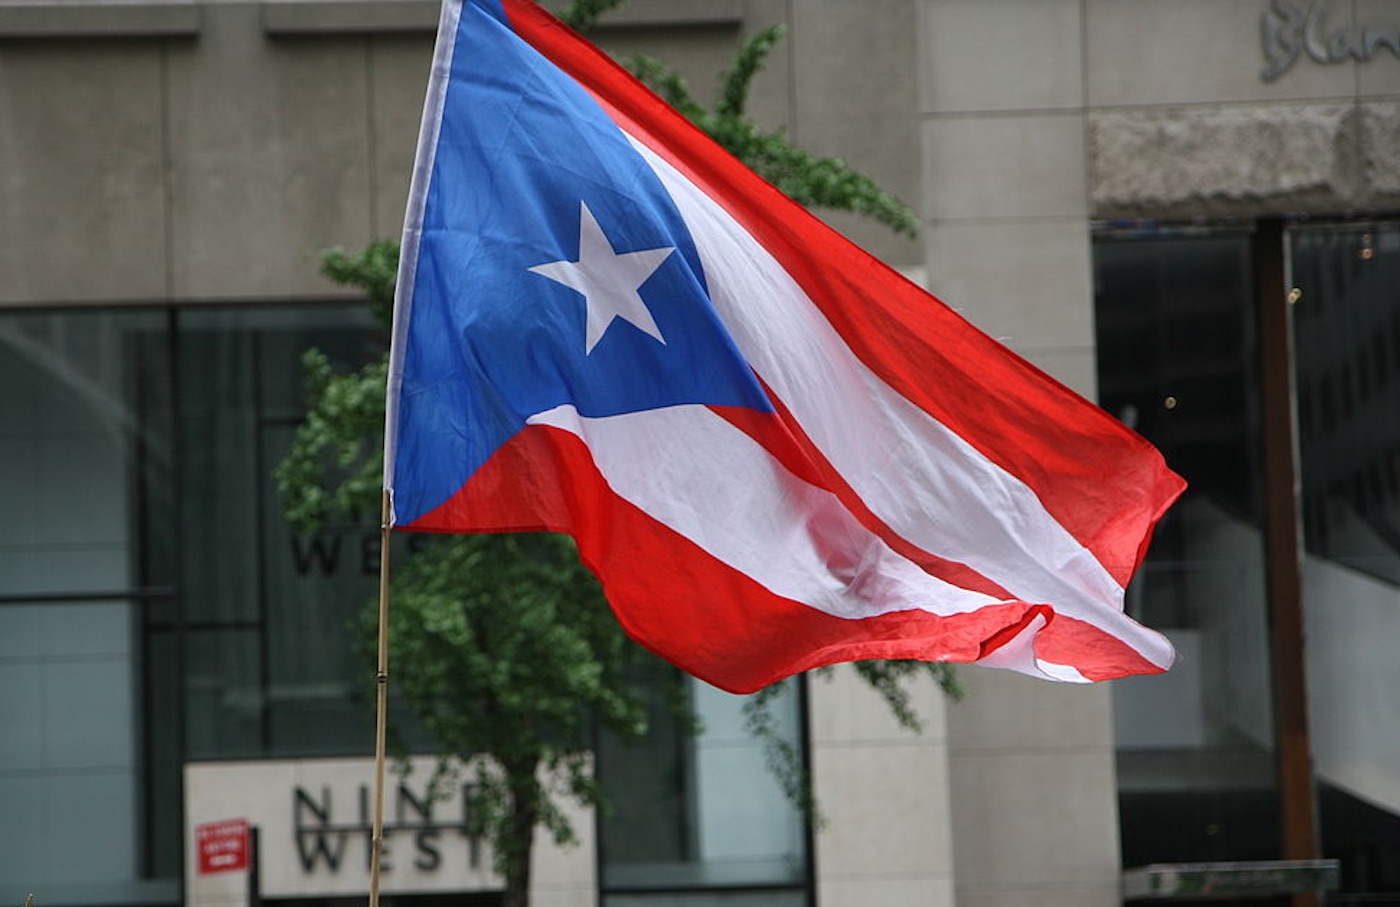 After a Century of American Citizenship, Puerto Ricans Have Little to Show for It